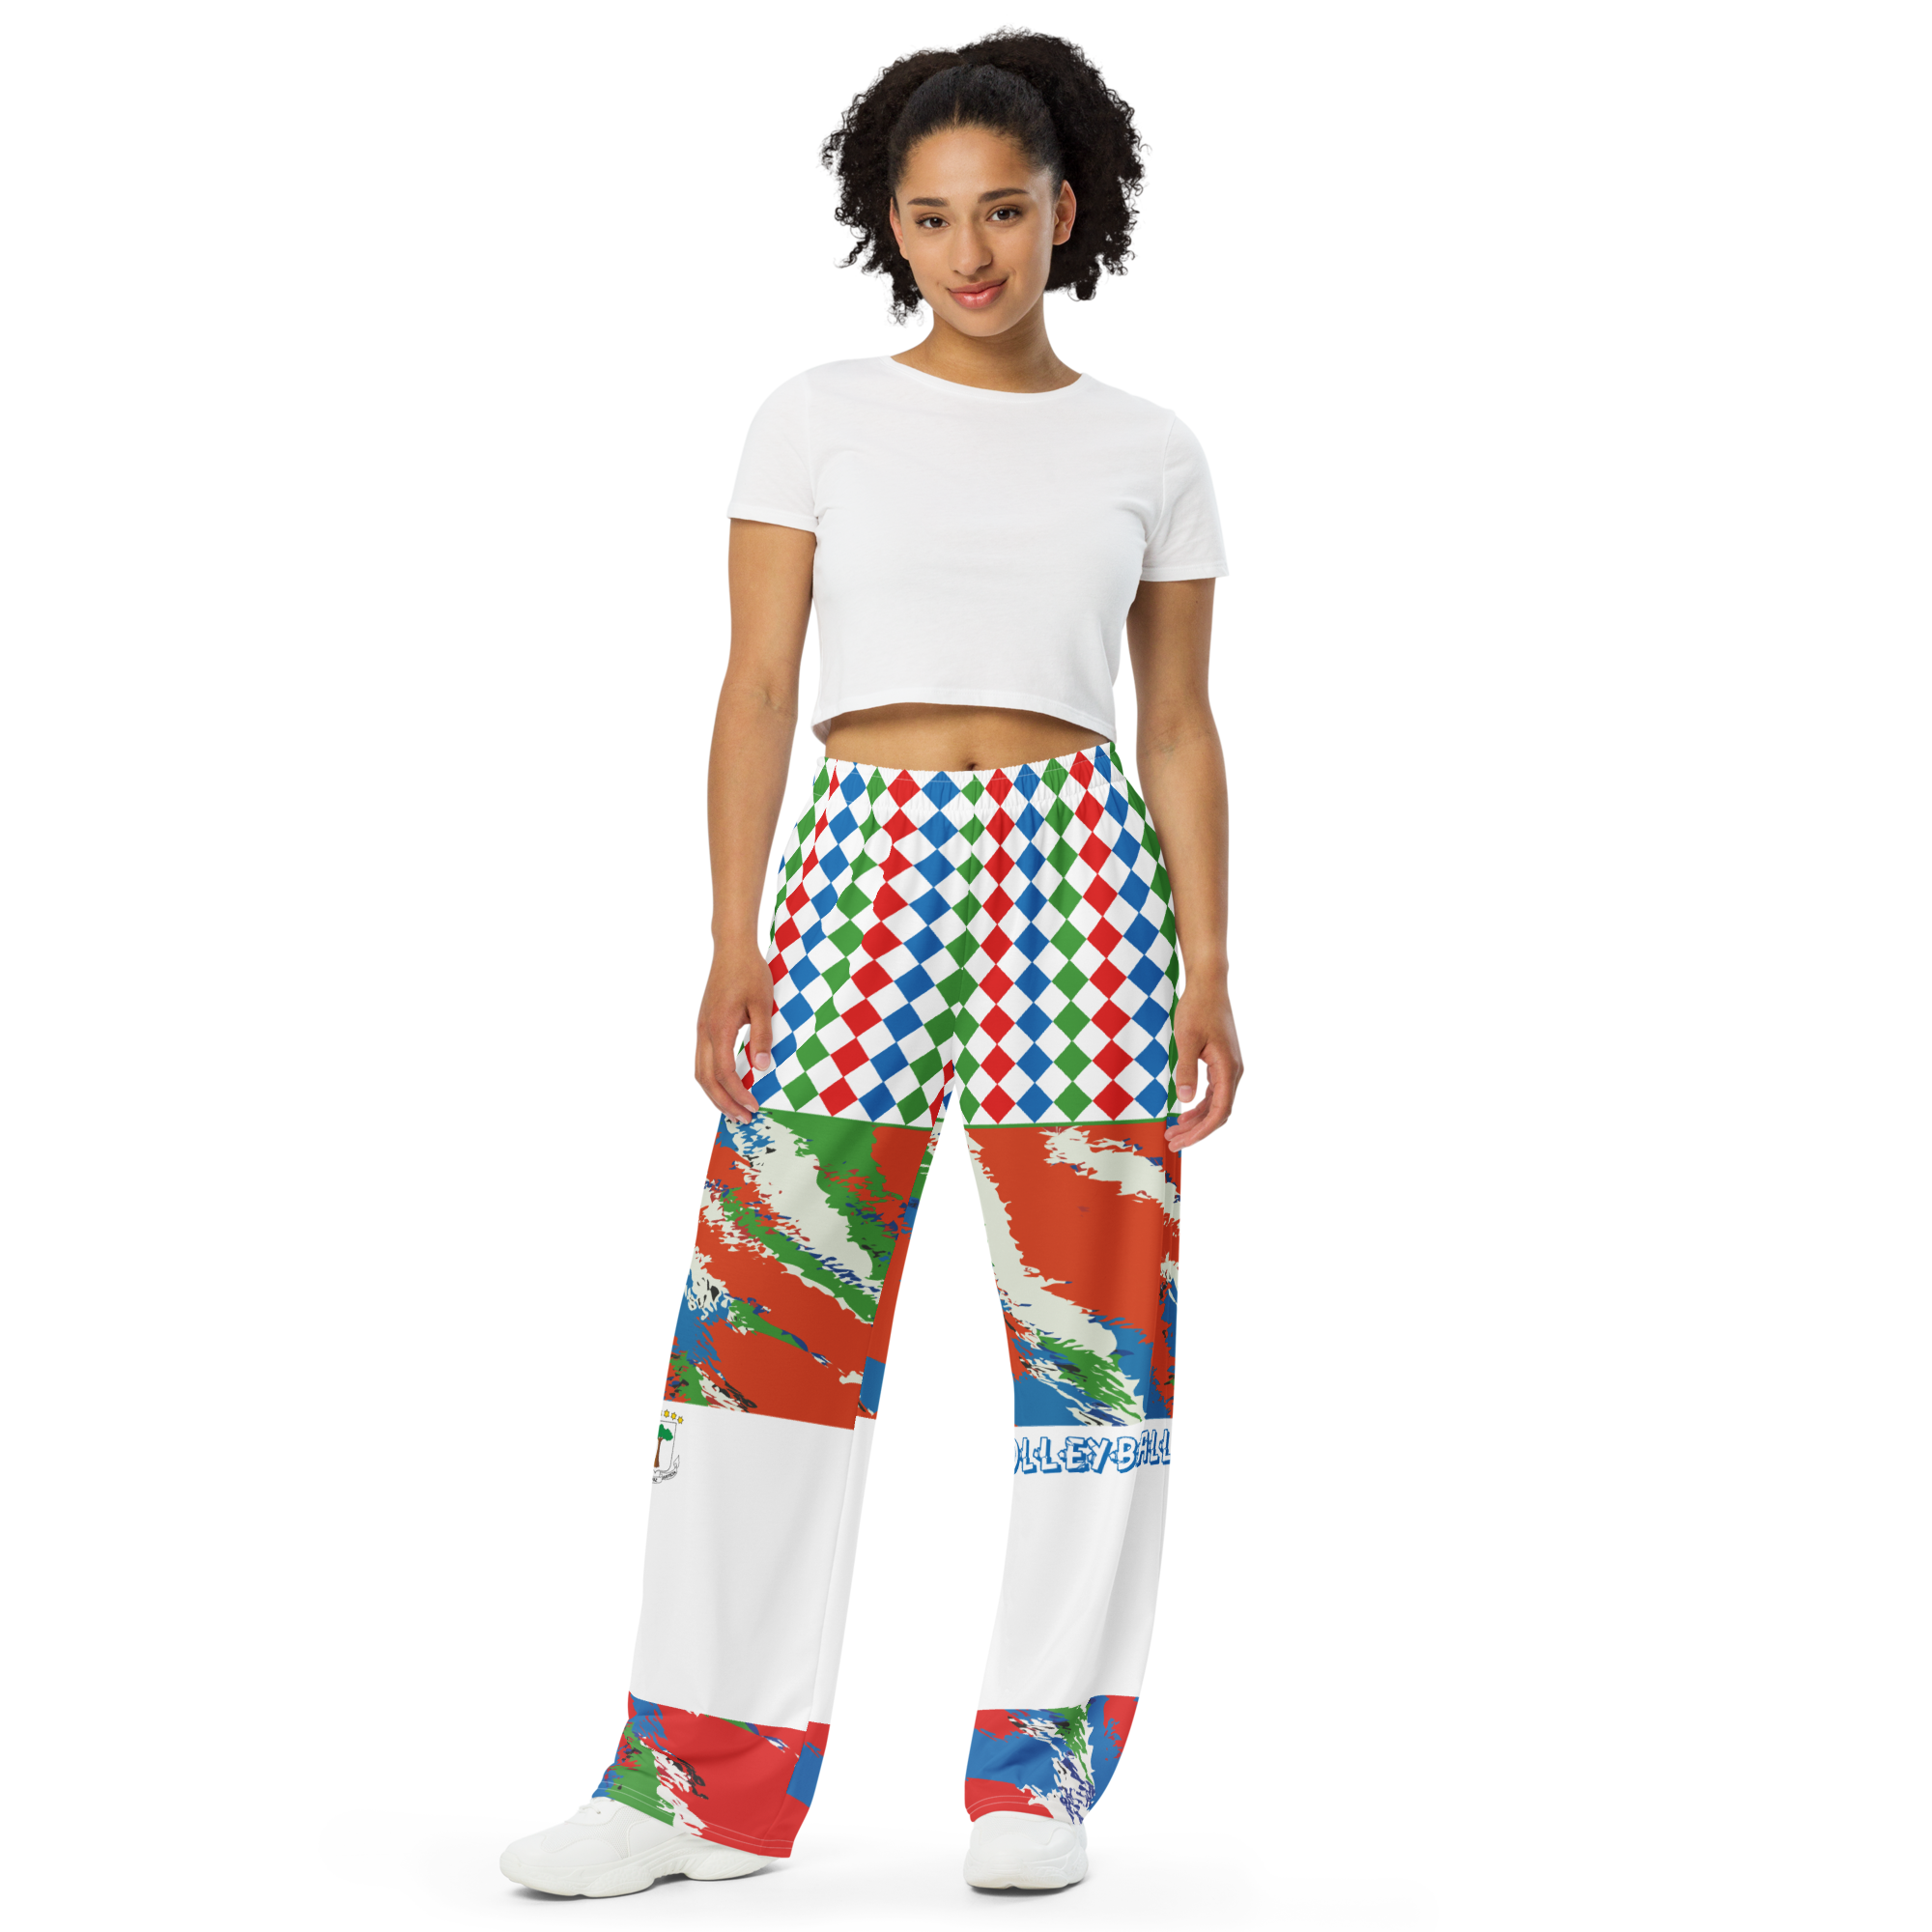 volleyball pj pants red green blue white